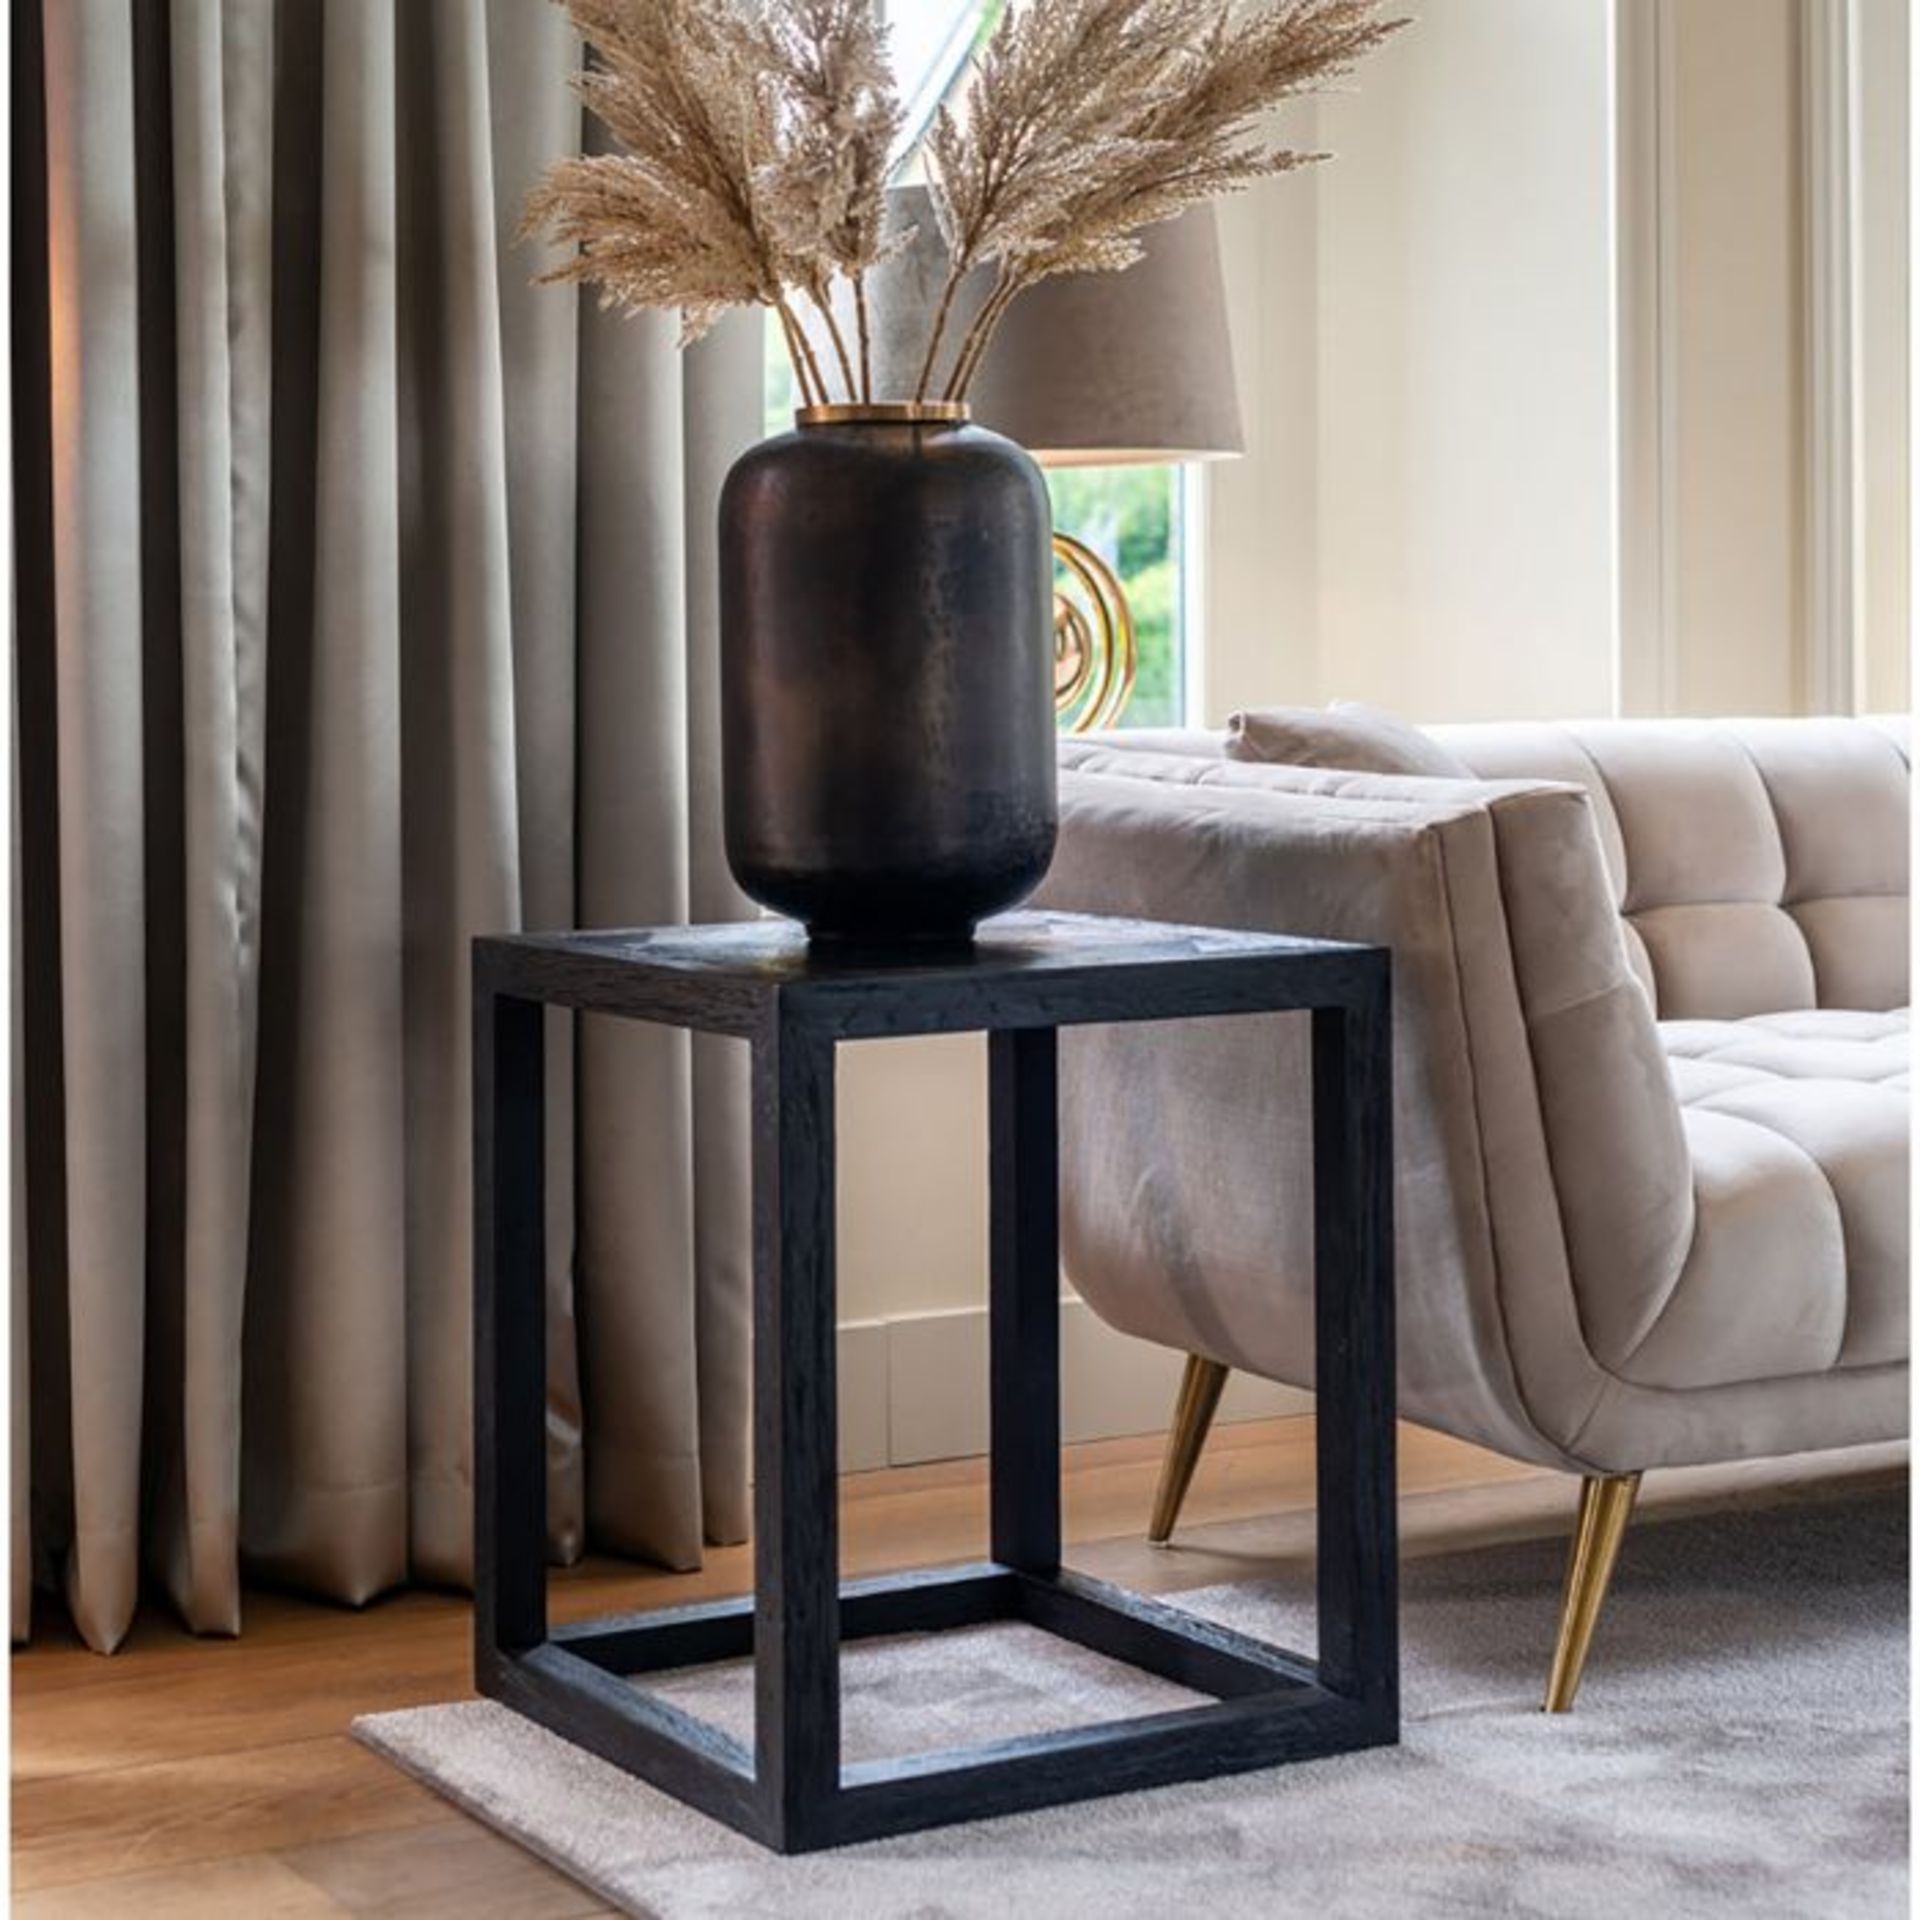 Moot Group Richmond Blax Black Side Table RRP ?586.00 The Richmond Blax Black Side Table is a lovely - Image 3 of 6